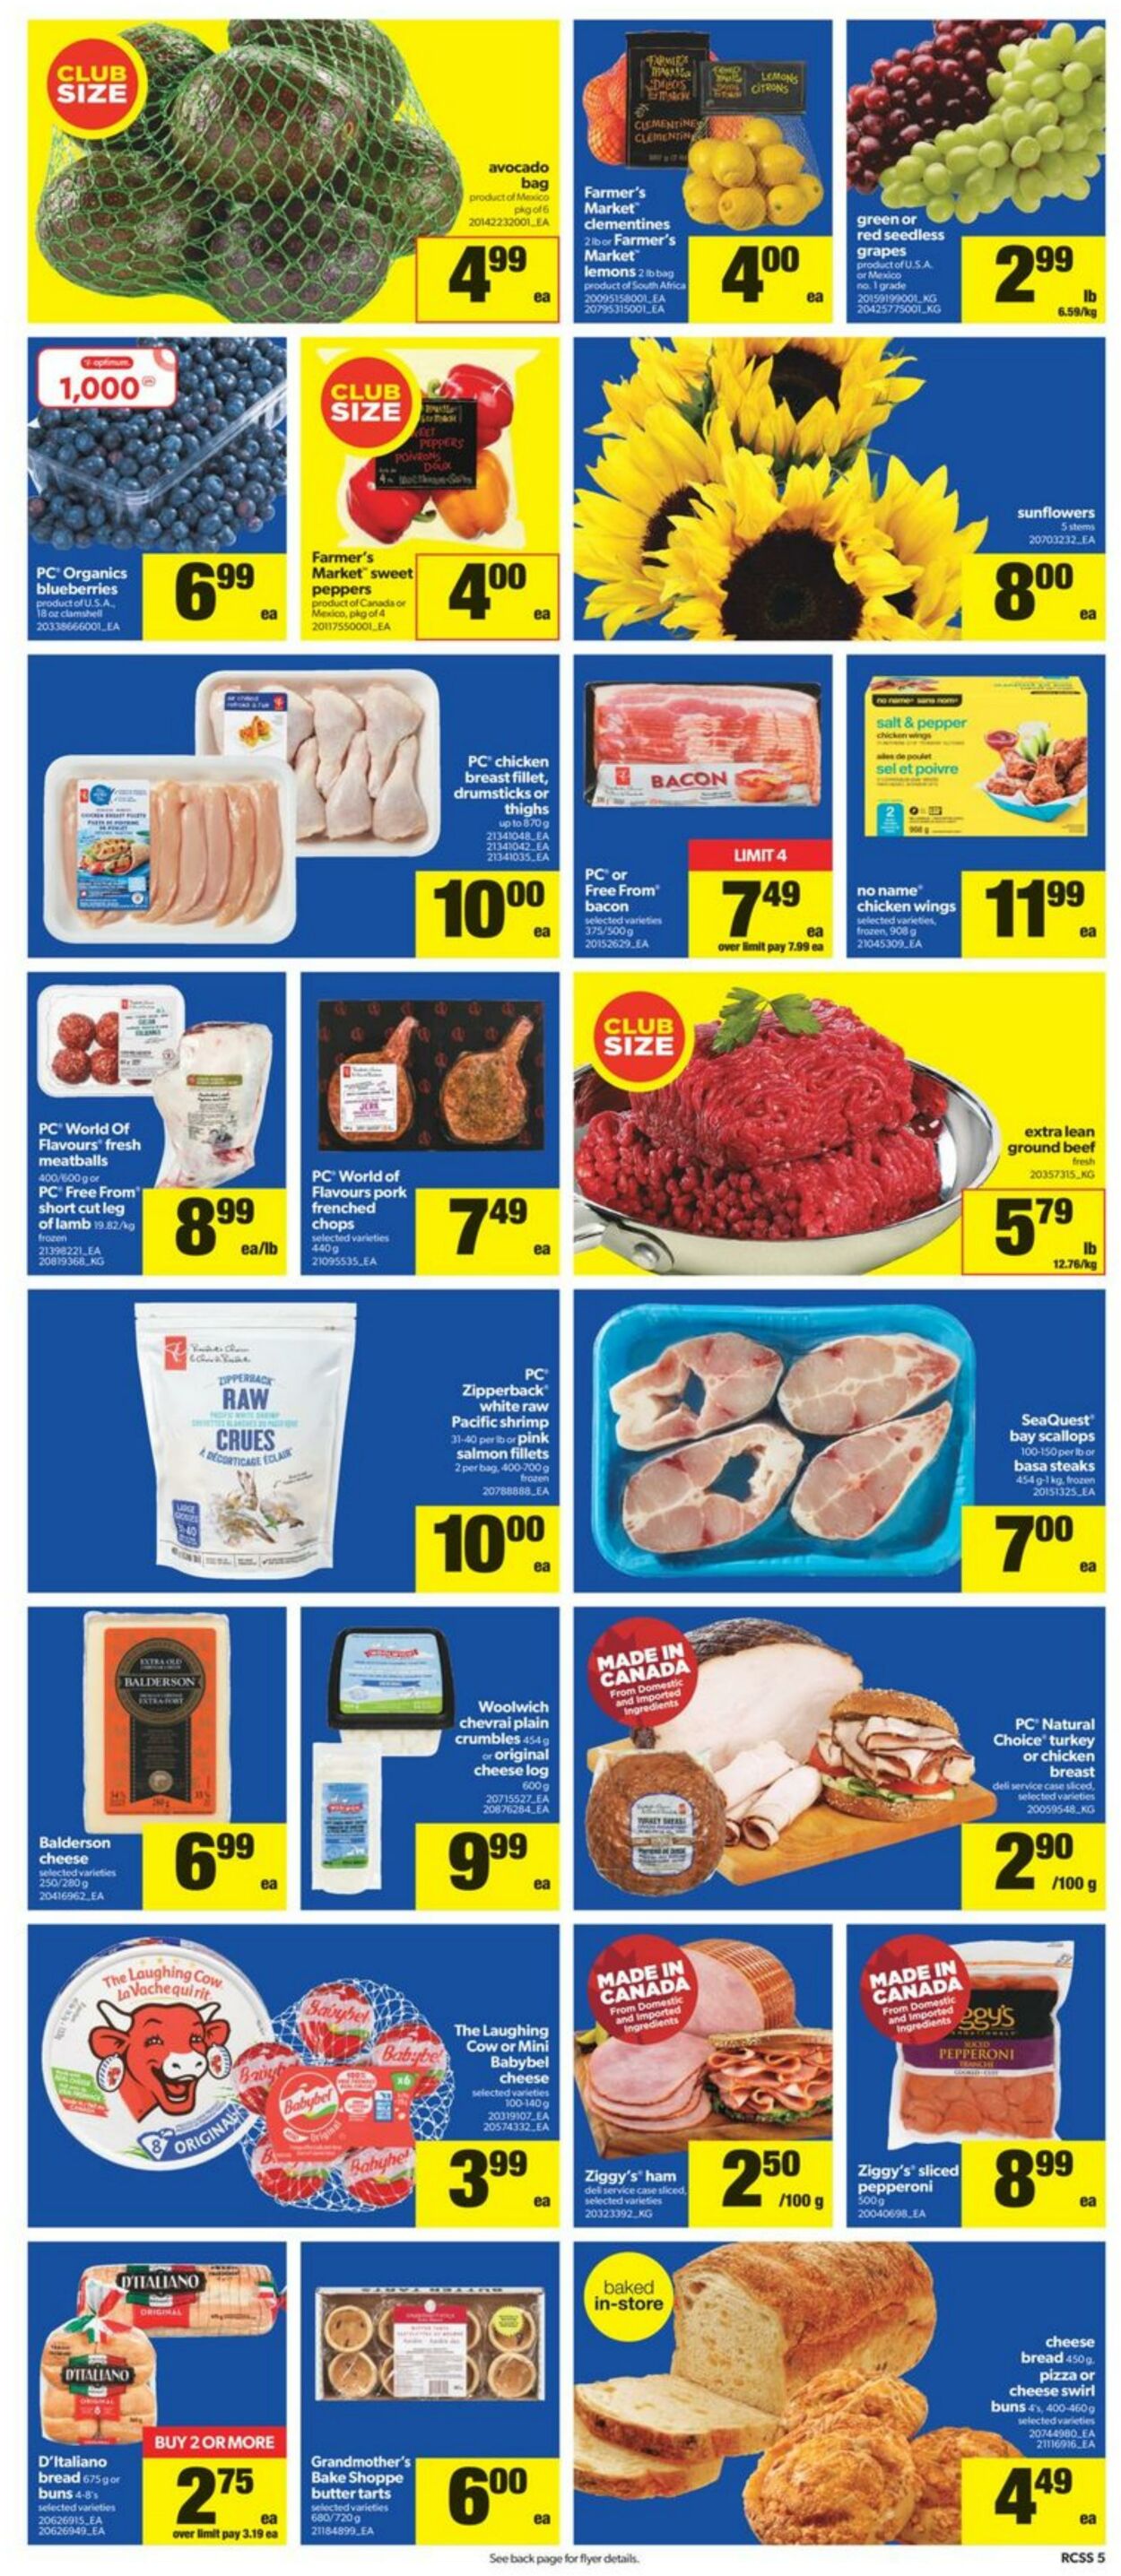 Flyer Real Canadian Superstore 21.07.2022 - 27.07.2022